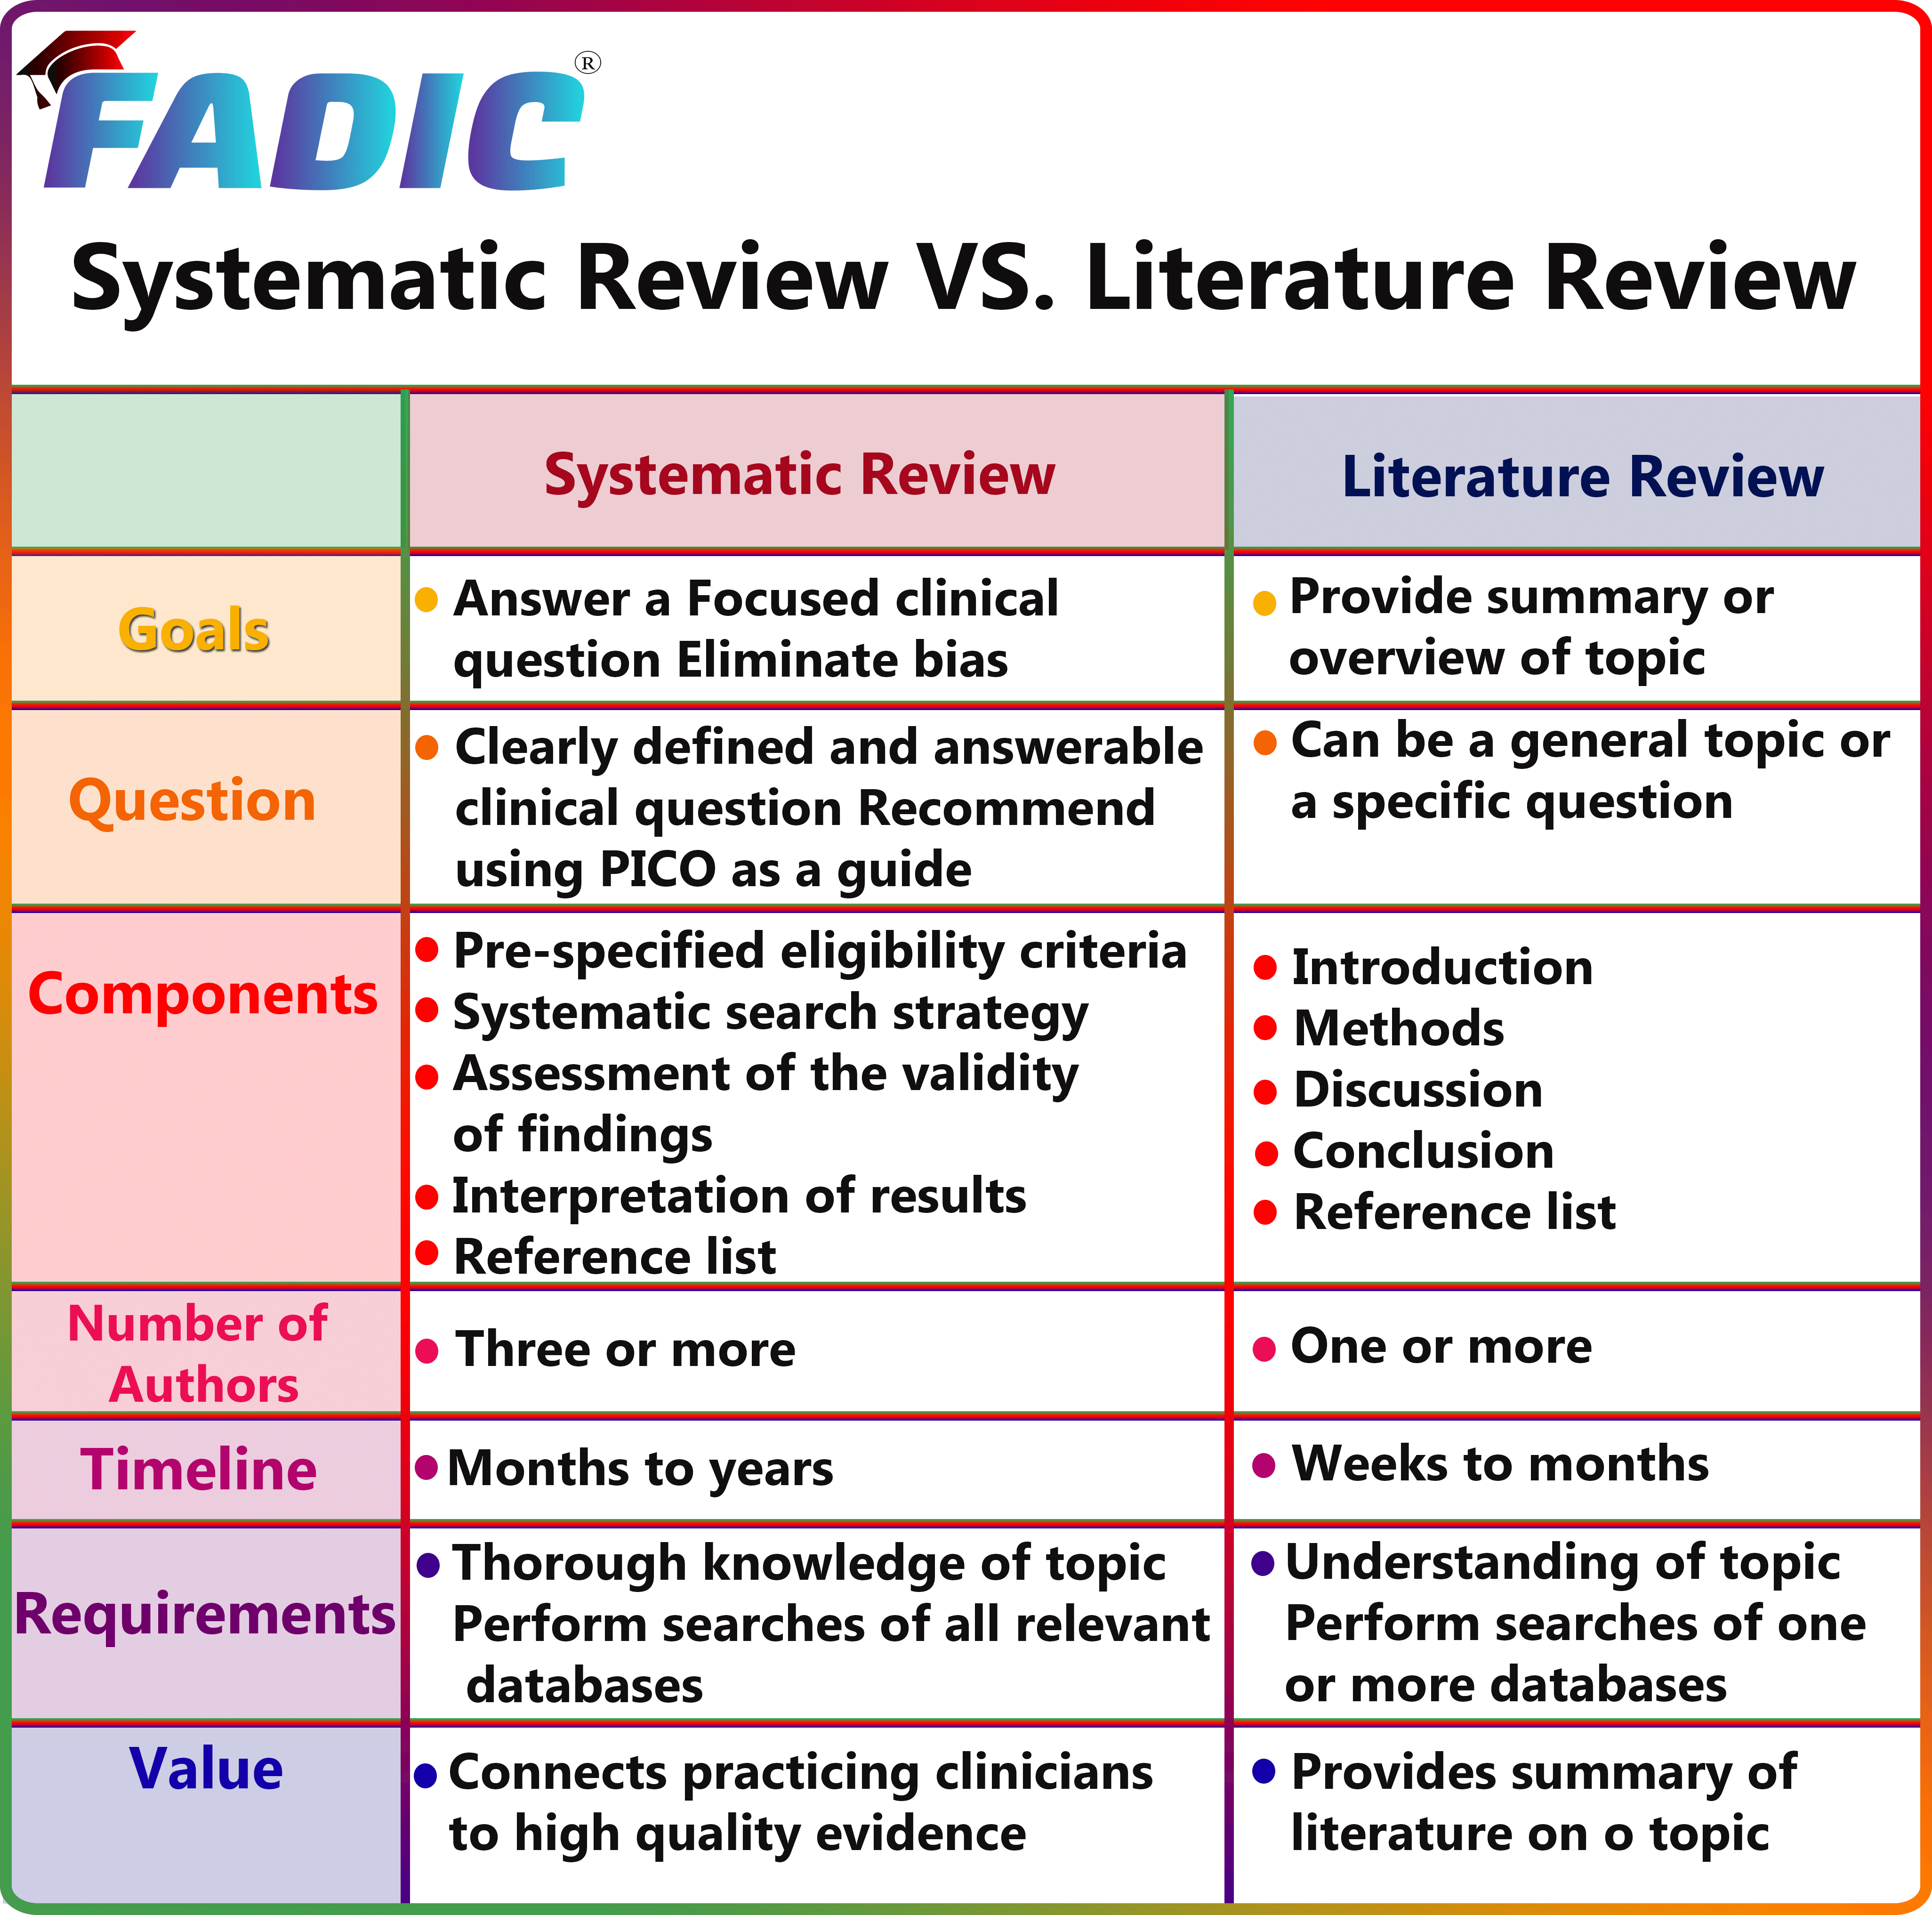 How to underestant the systematic review course